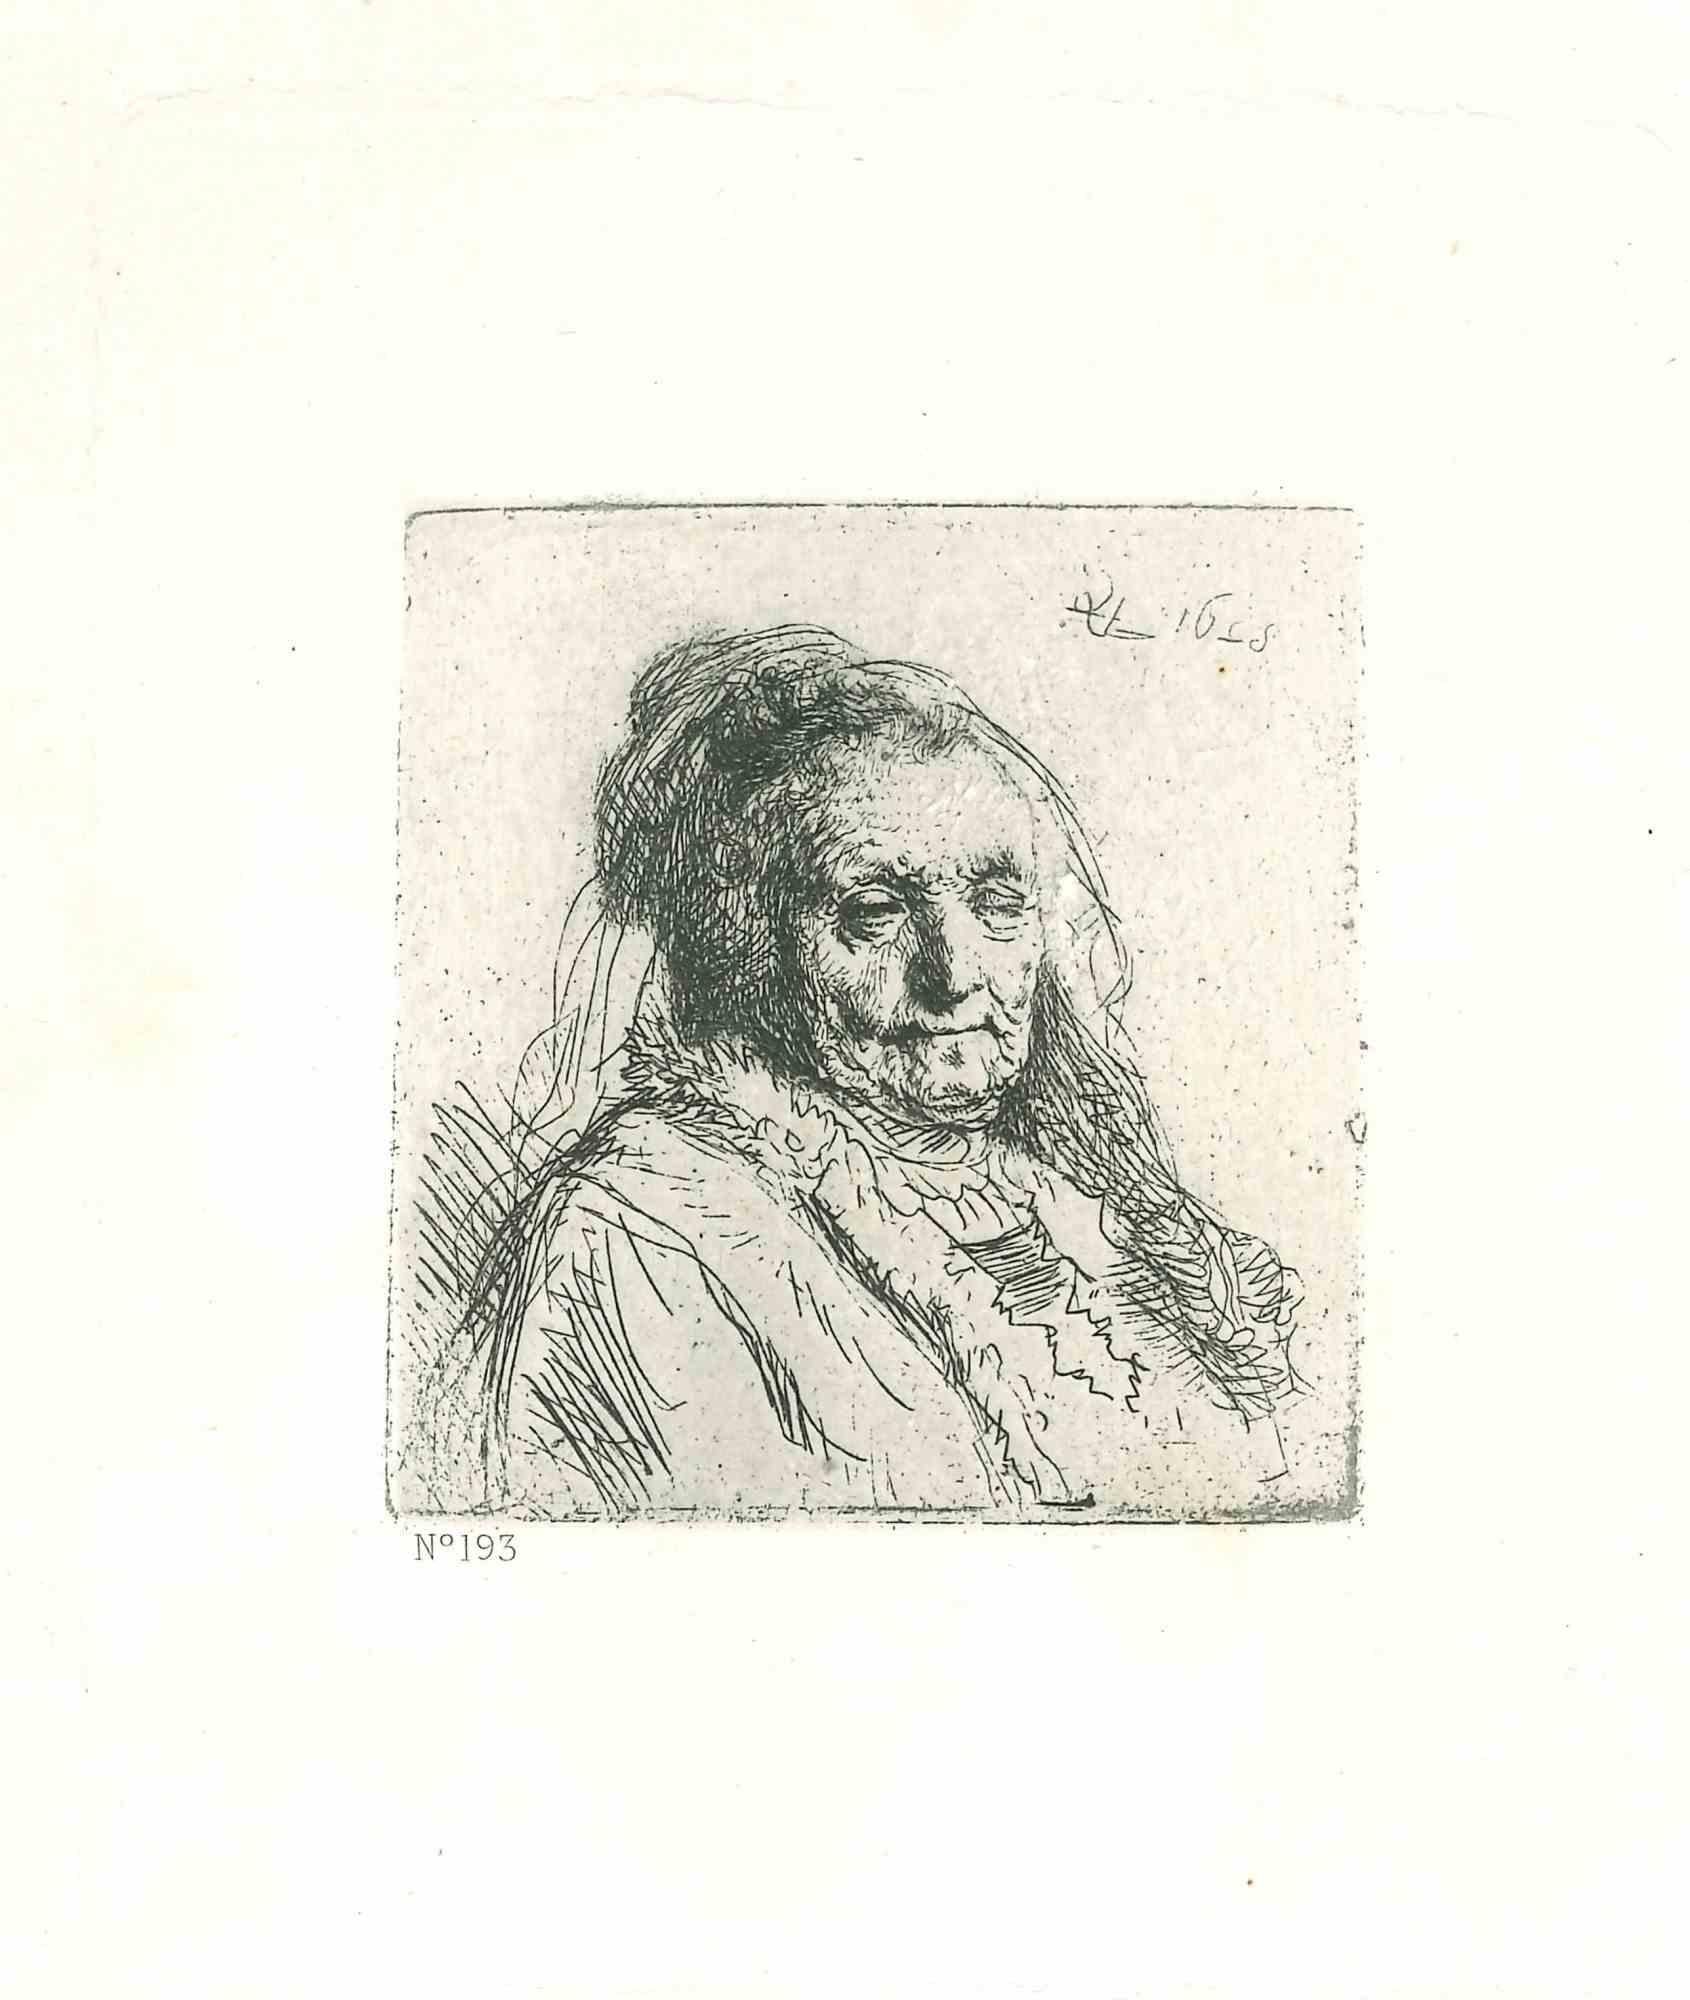 Charles Amand Durand Figurative Print - The Artist's Mother - Engraving after Rembrandt - 19th Century